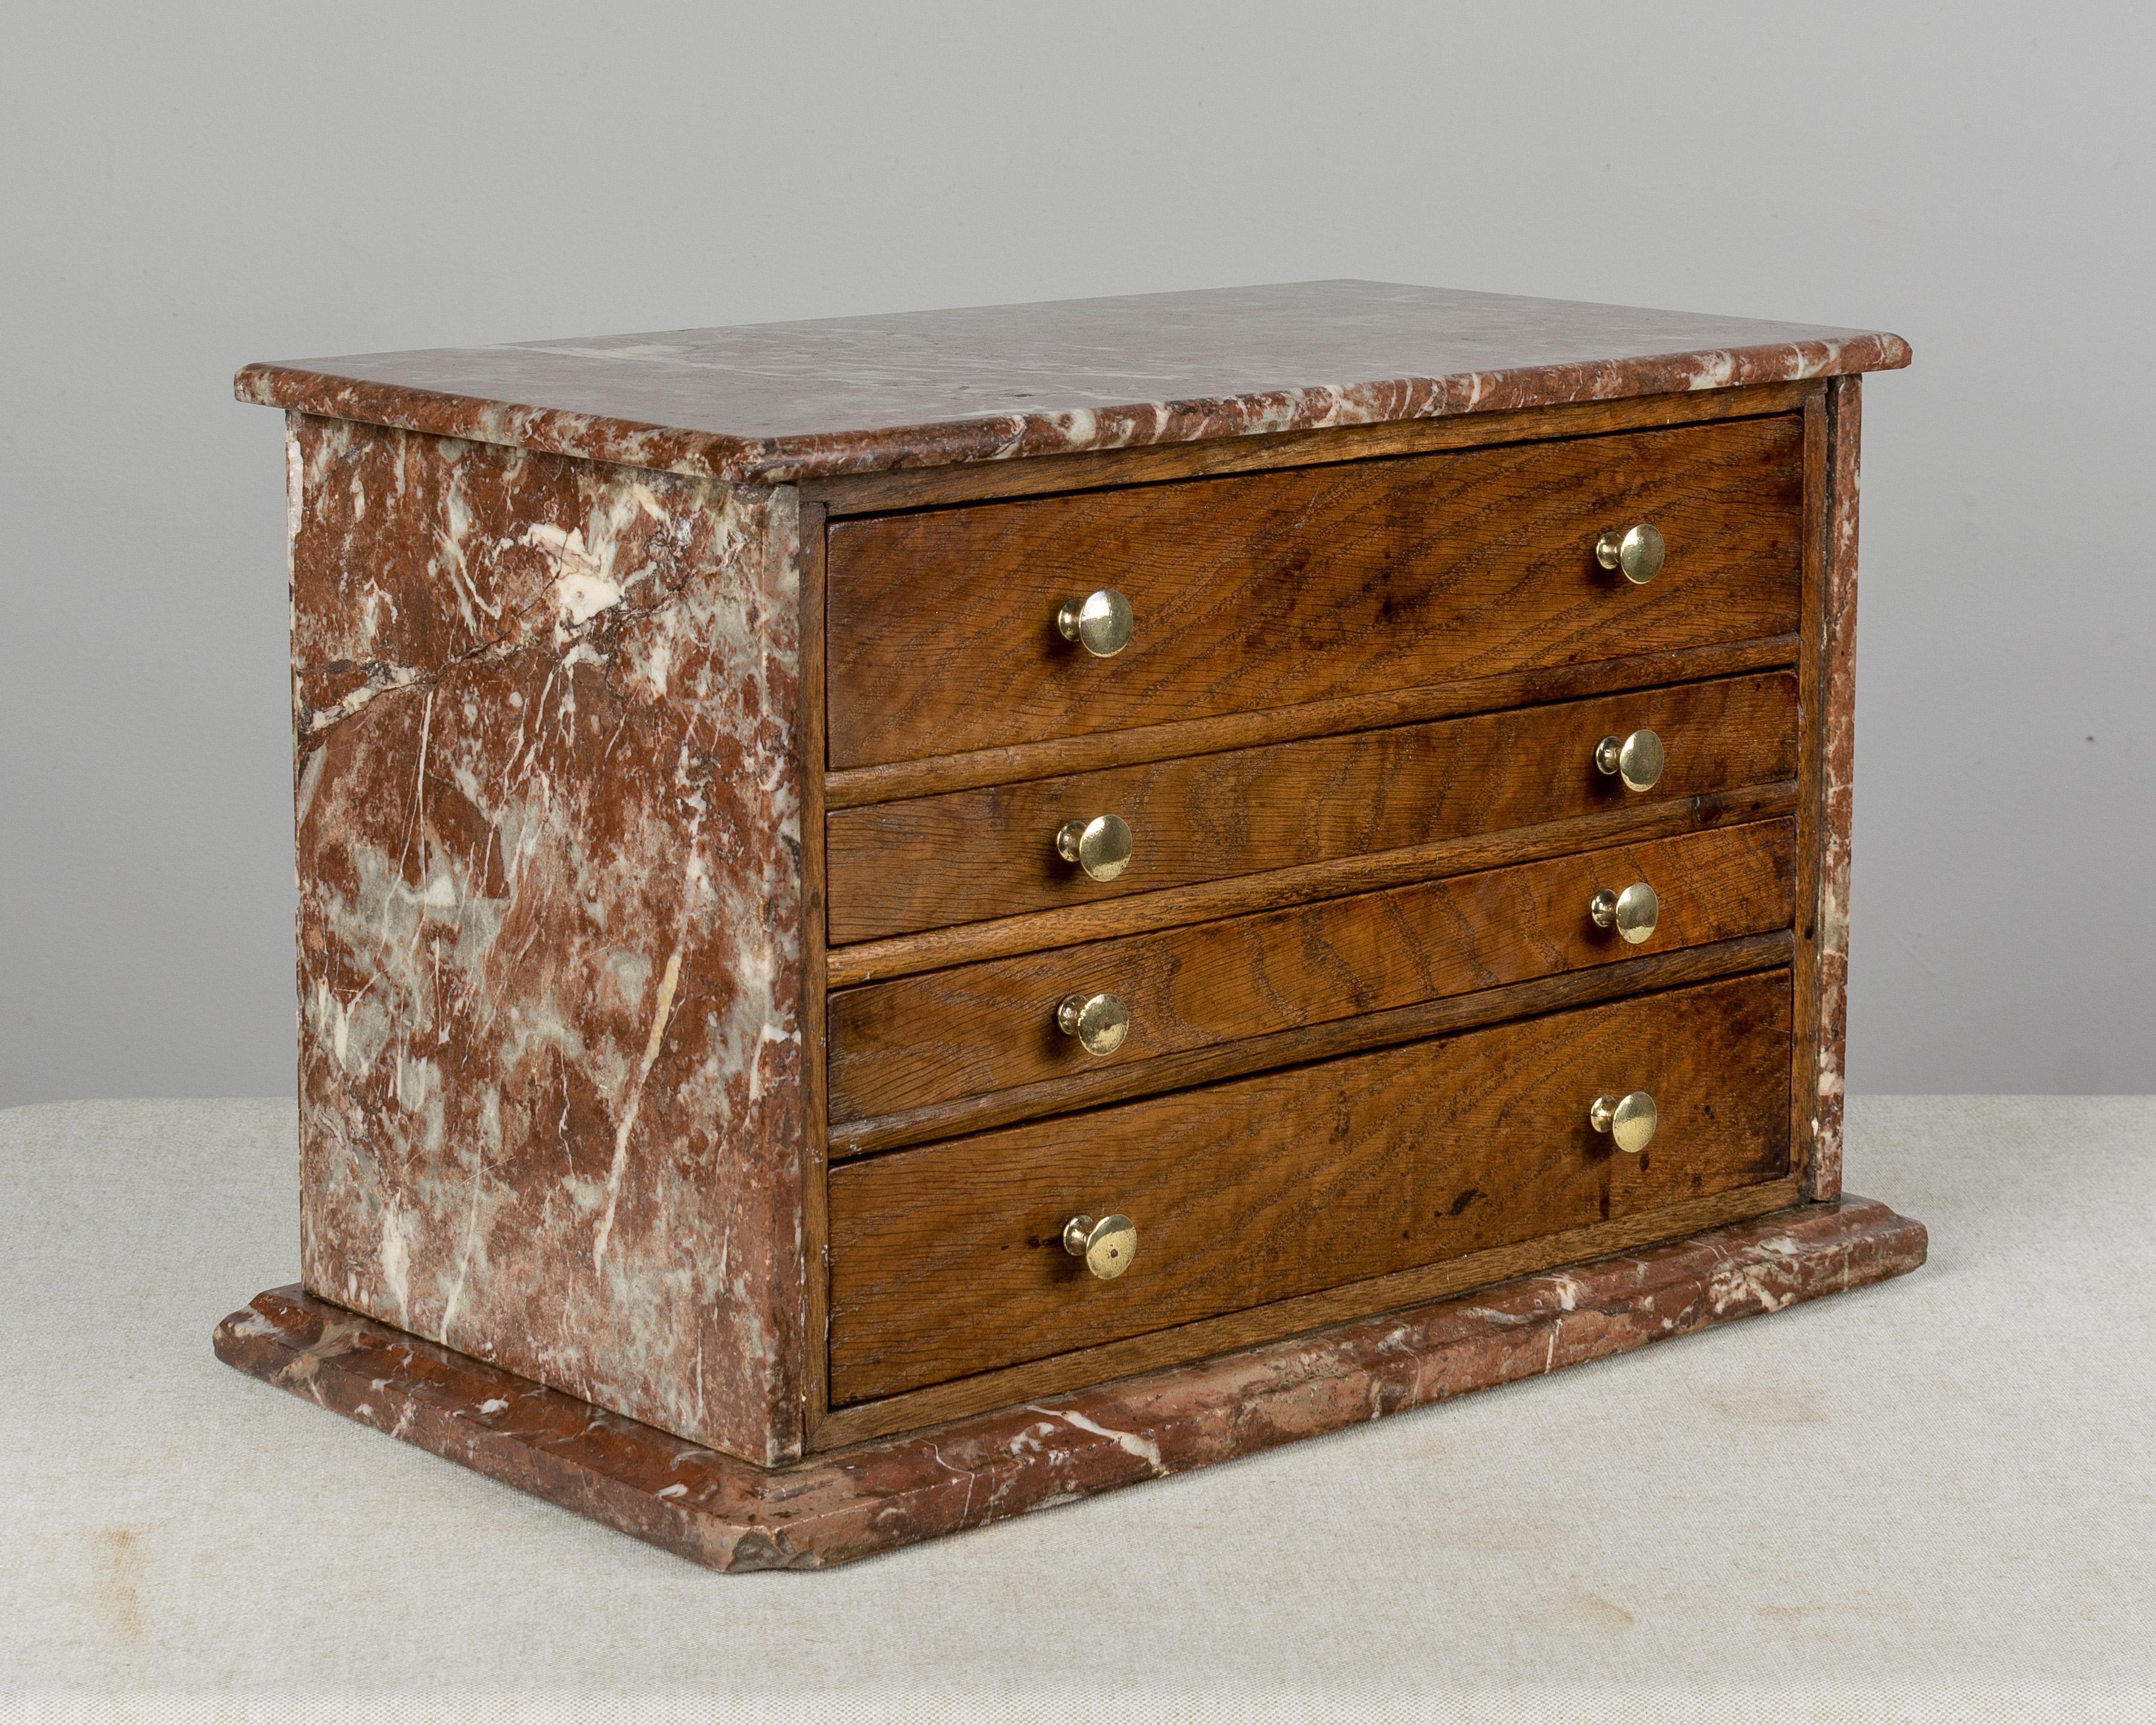 An unusual 19th century French miniature chest clad in Rouge Royal marble. Four dovetailed drawers are made of oakwood on the face and have polished brass knobs. The bottom drawer is divided.  Pine as a secondary wood. All original. Perfect for